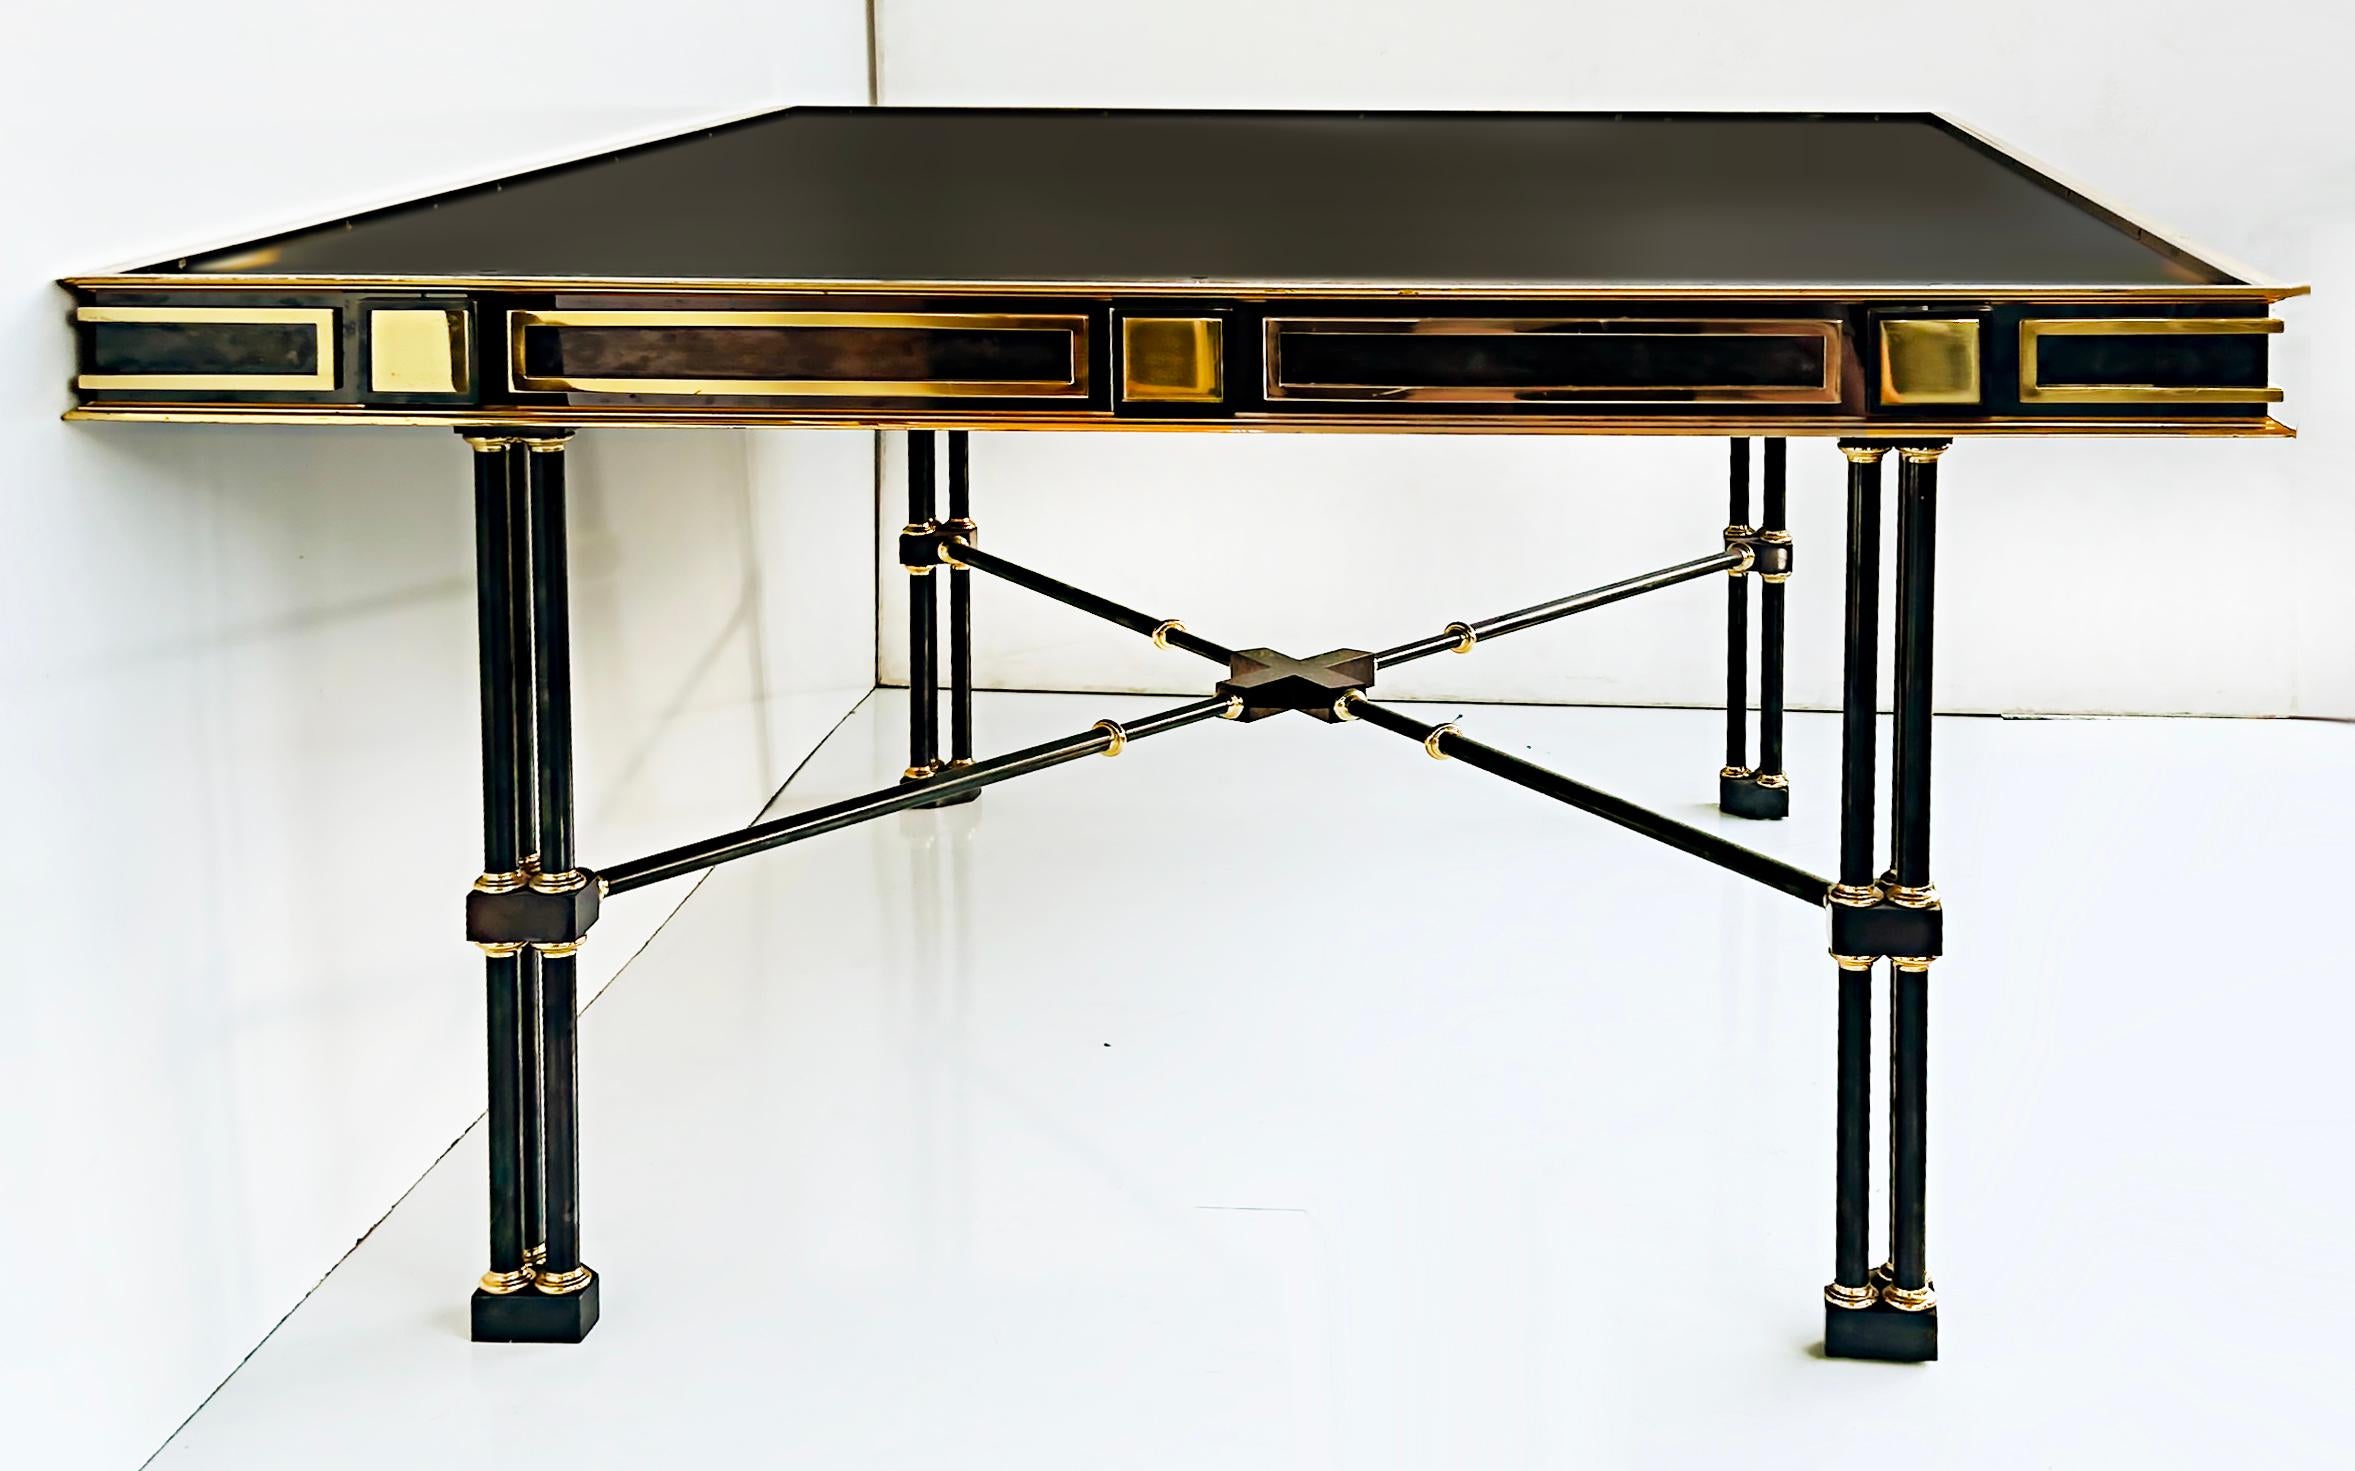 Vintage Ron Seff substantial gun metal bronze & brass table circa 1980s

Offered for sale is a very heavy substantial table by Ron Seff in gunmetal and brass. The table is quite elegant with a modern Neoclassical look however it is
missing the